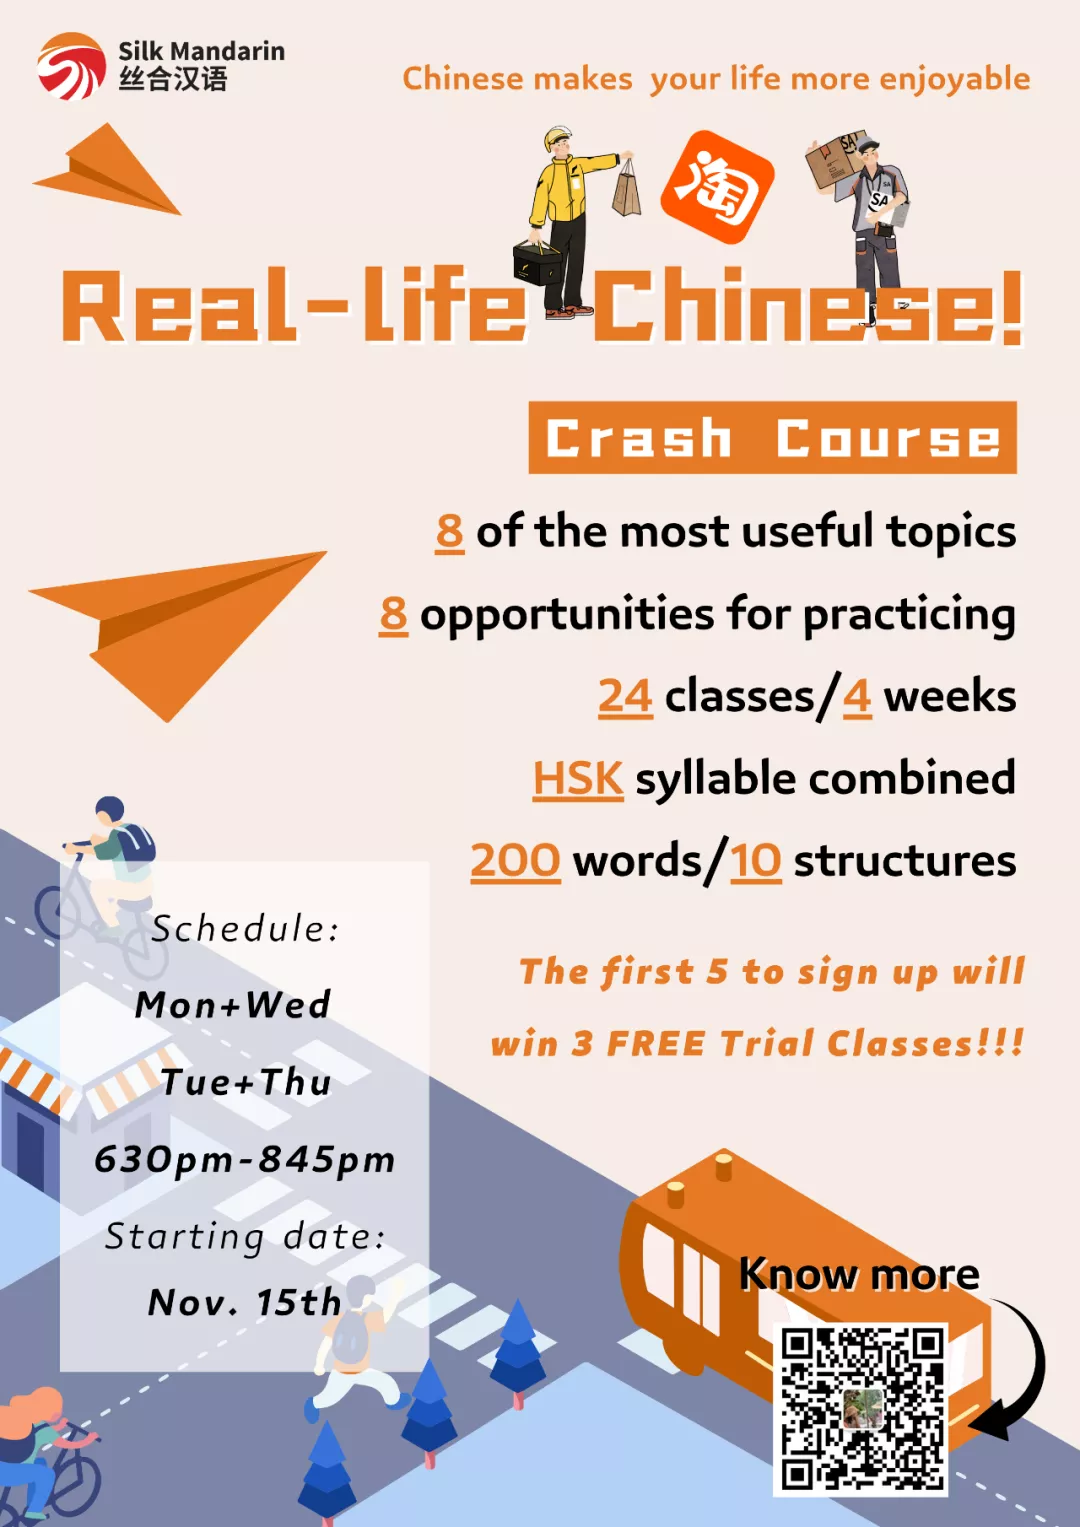 Suzhou Campus | Real-Life Chinese Crash Course is Enrolling Now!